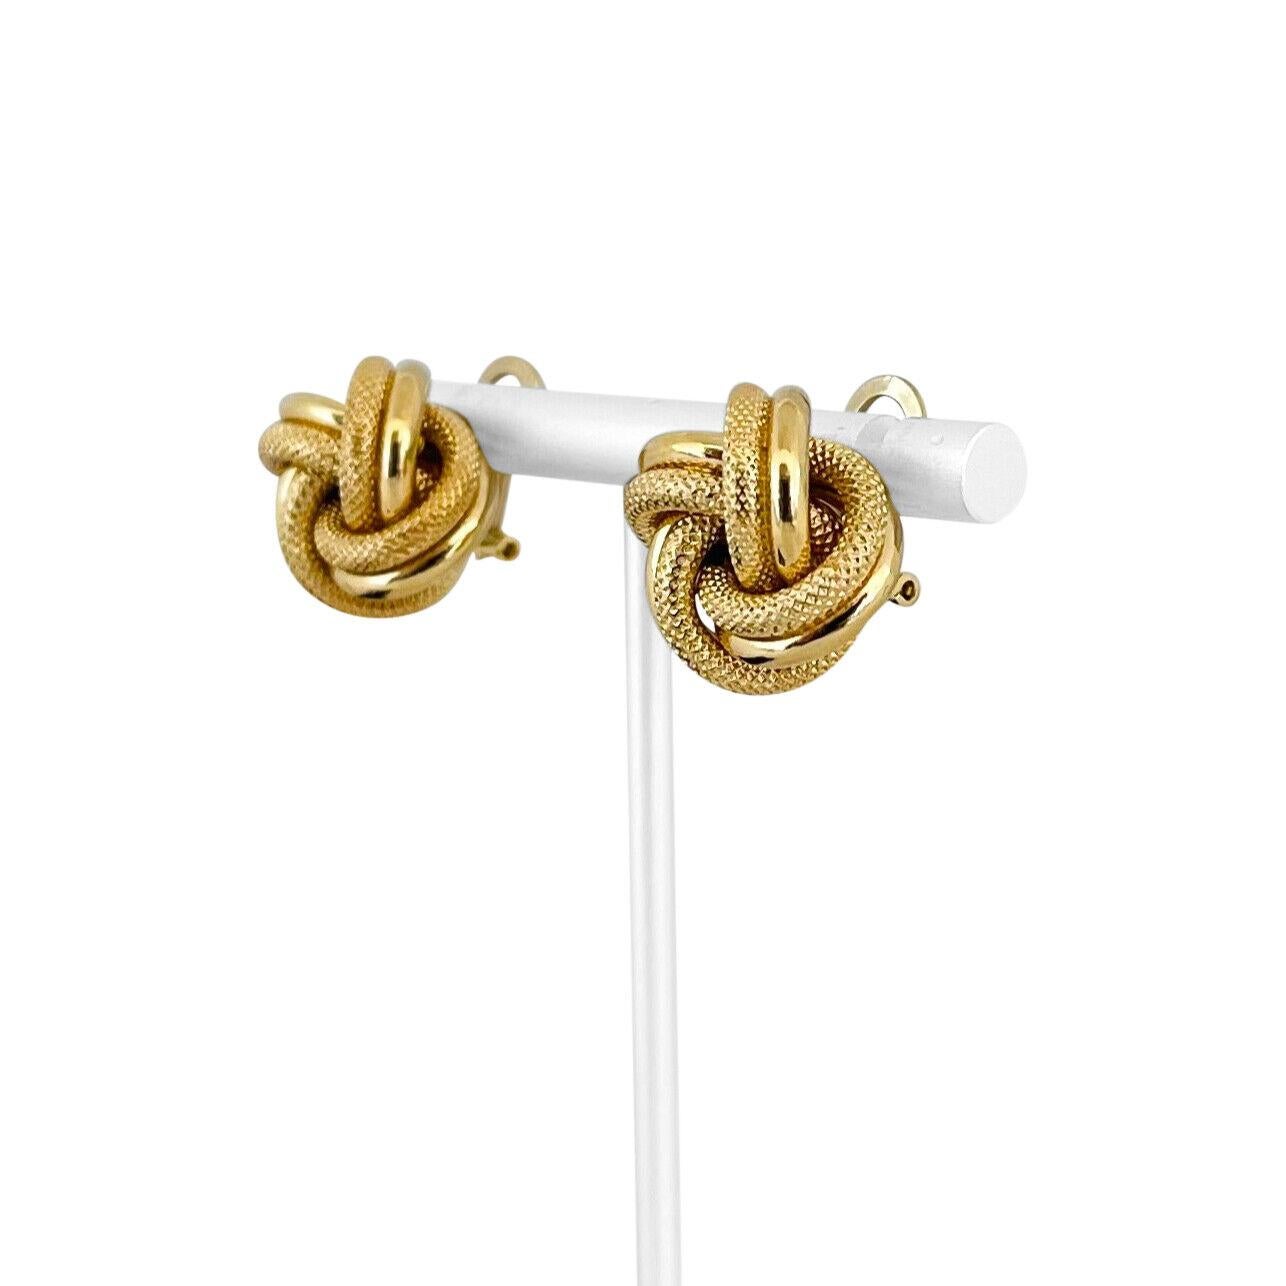 18k Yellow Gold 8.3g Ladies UnoAErre Textured Fancy Knot Earrings Italy

Condition:  Excellent Condition, Professionally Cleaned and Polished
Metal:  18k Gold (Marked, and Professionally Tested)
Weight:  8.3g
Length:  .7 Inches
Width:  .7